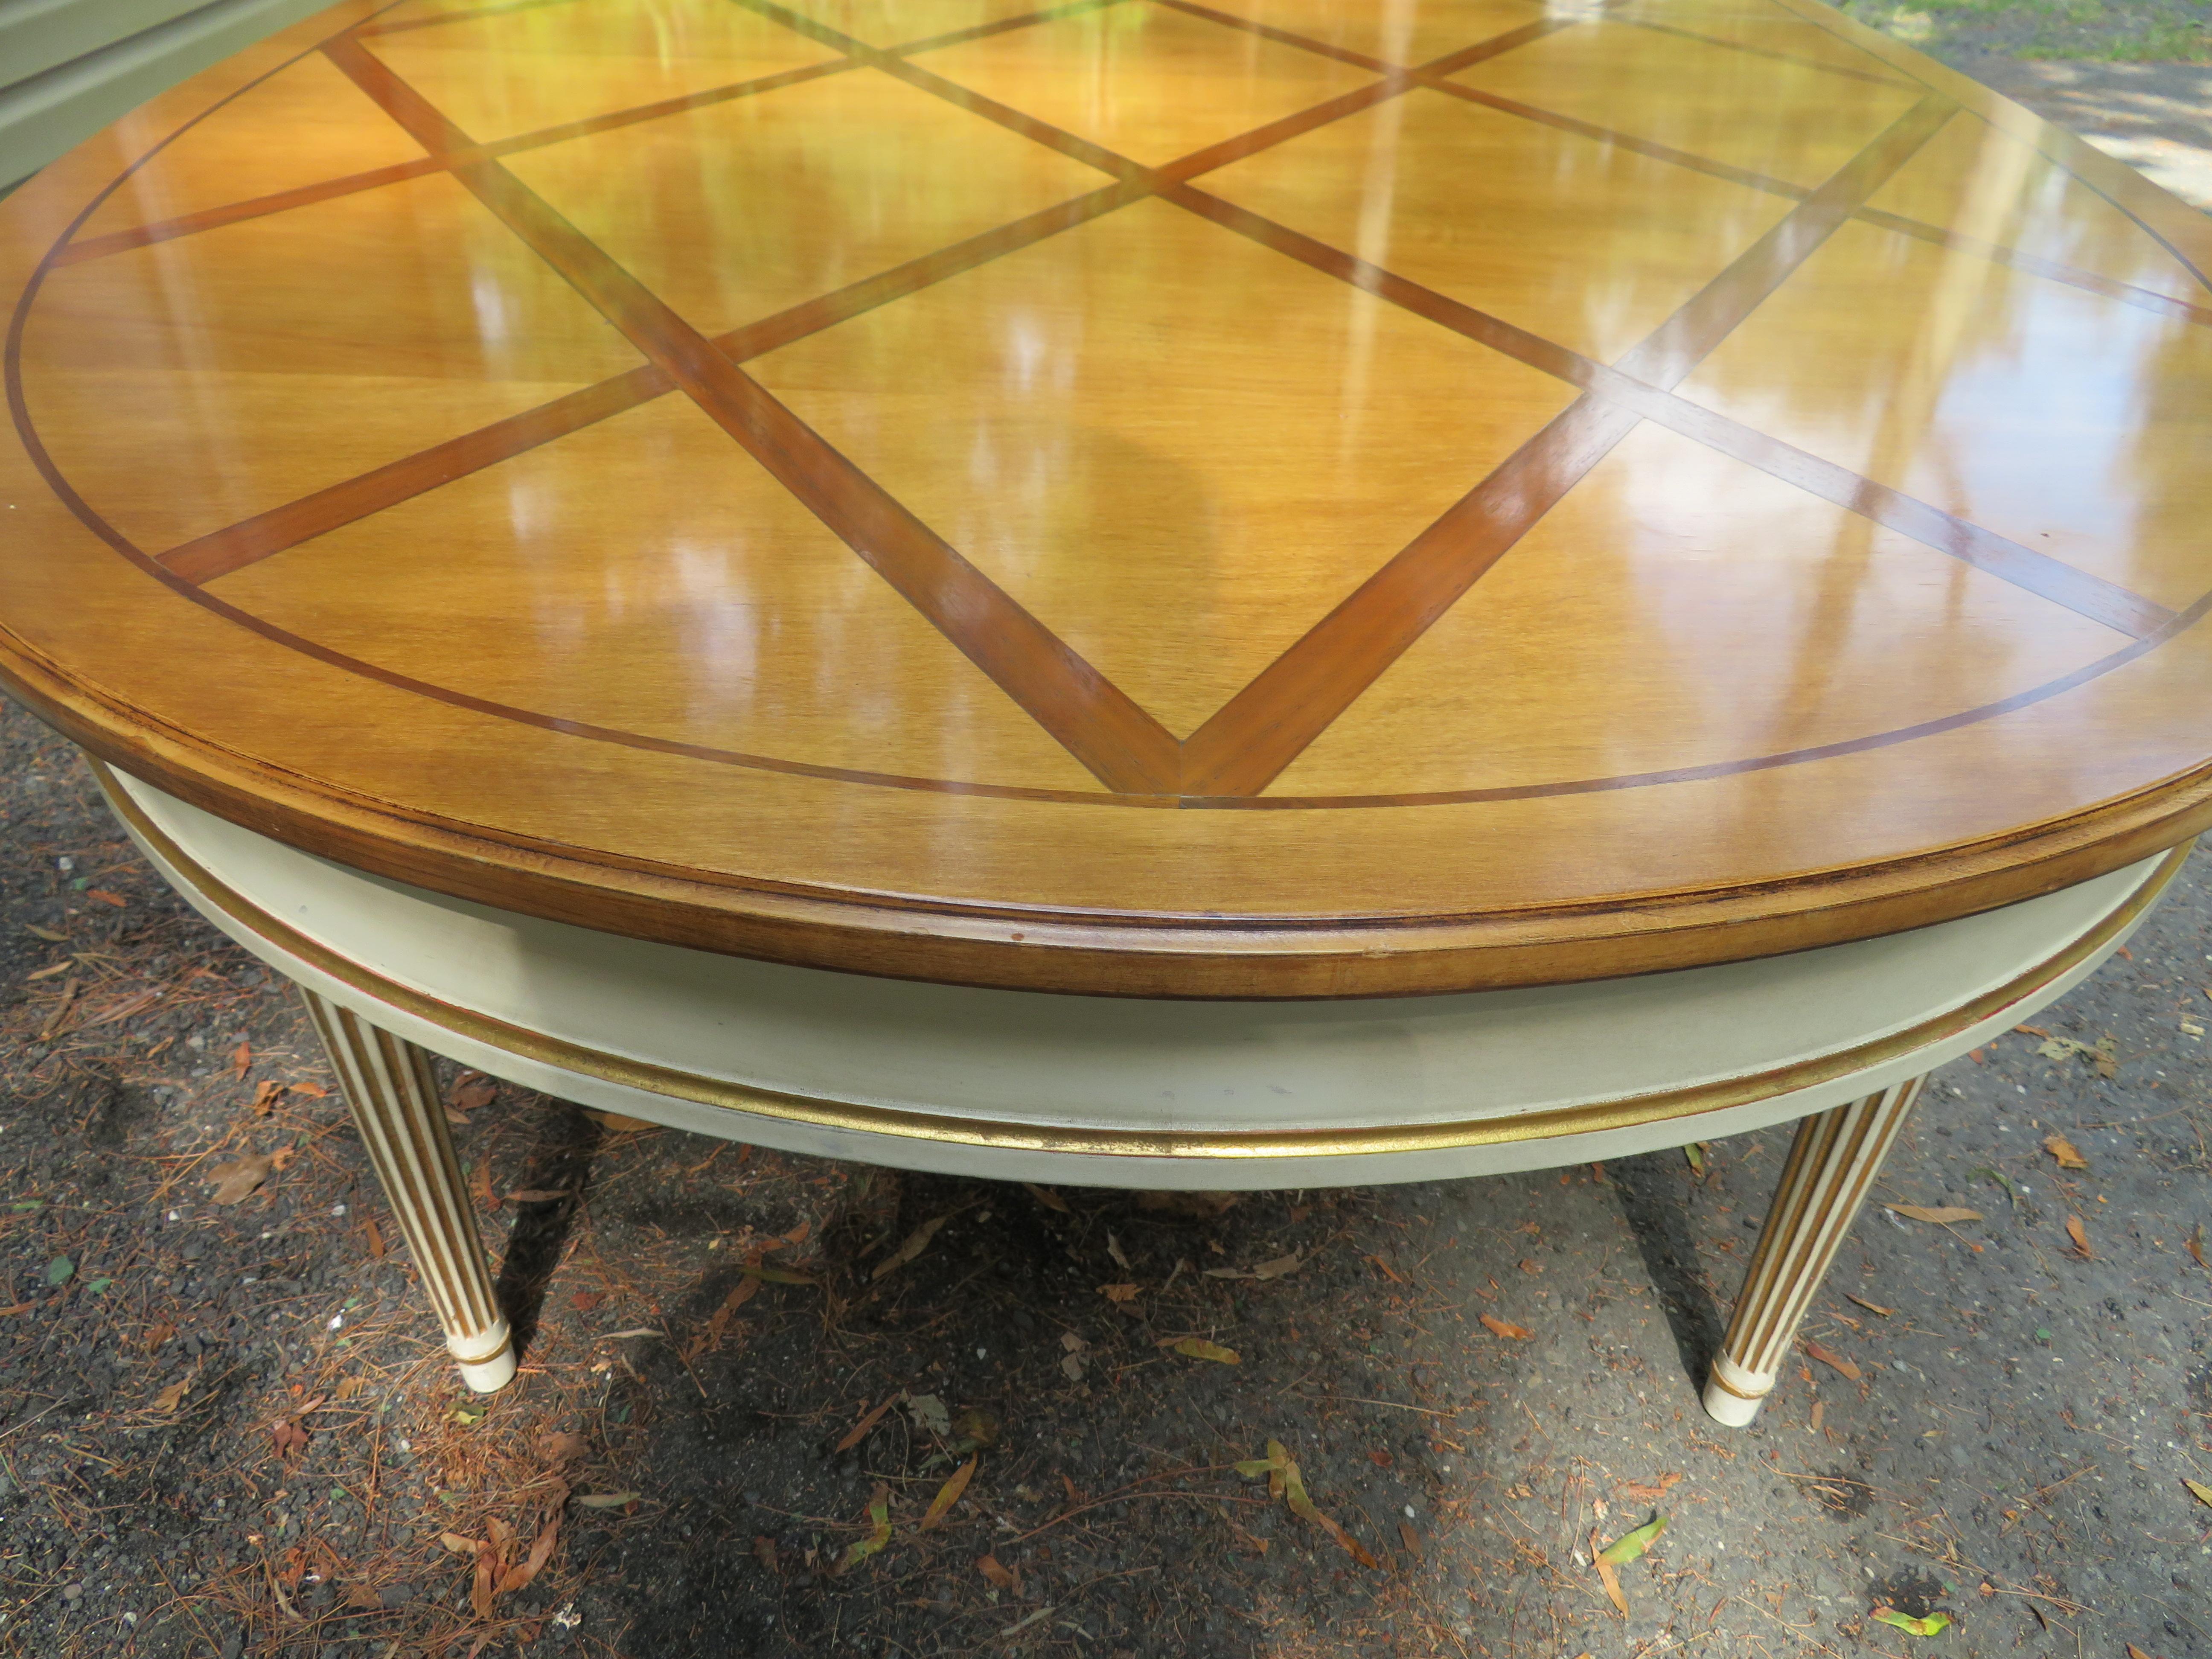 American Stunning In-Laid Lattice Top Racetrack Dining Table Hollywood Regency